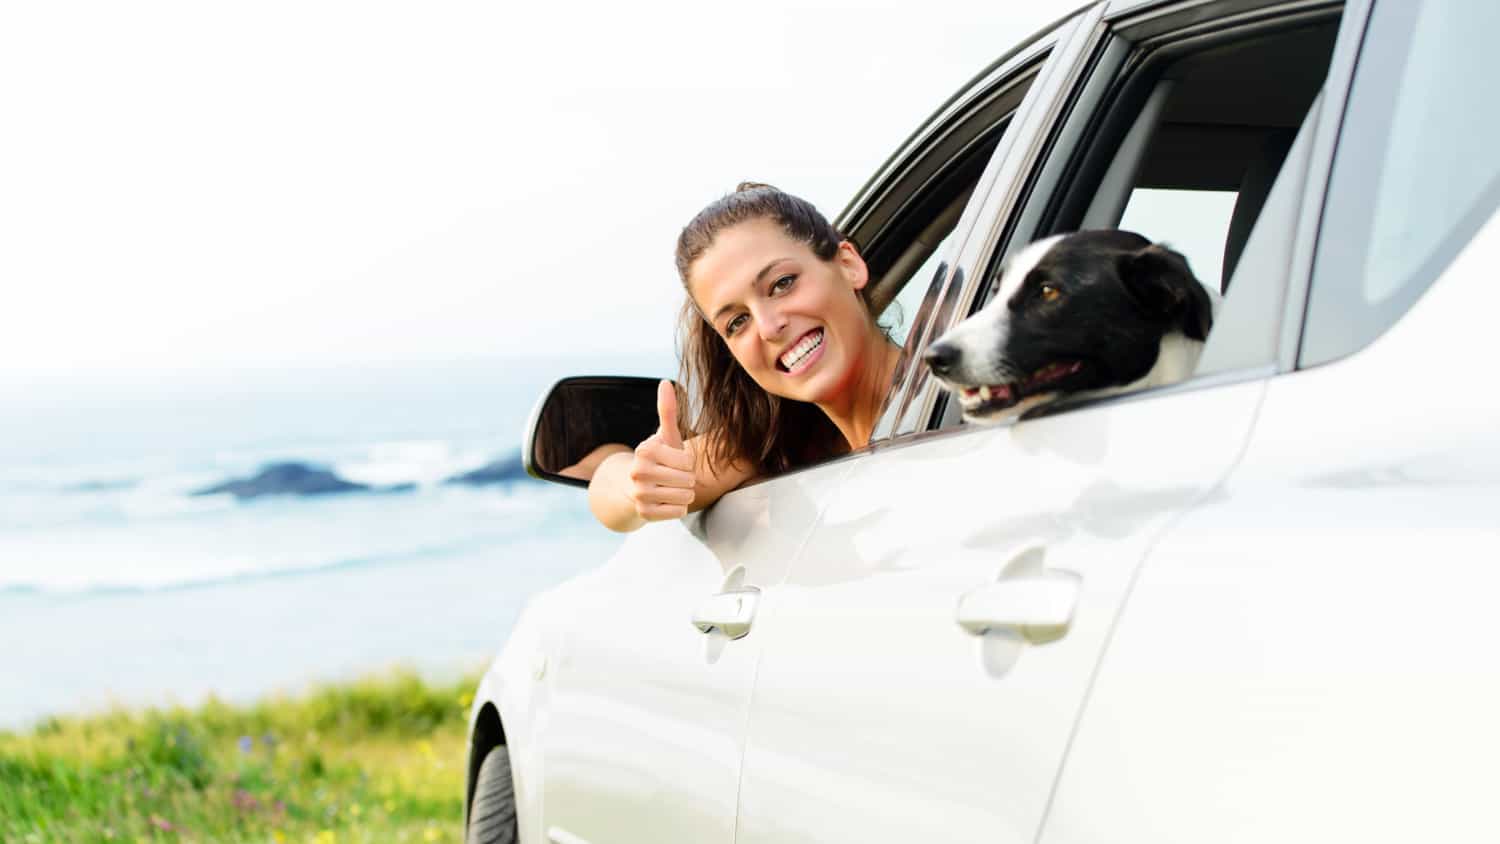 Happy woman traveling in car with dog. Coast landscape background.